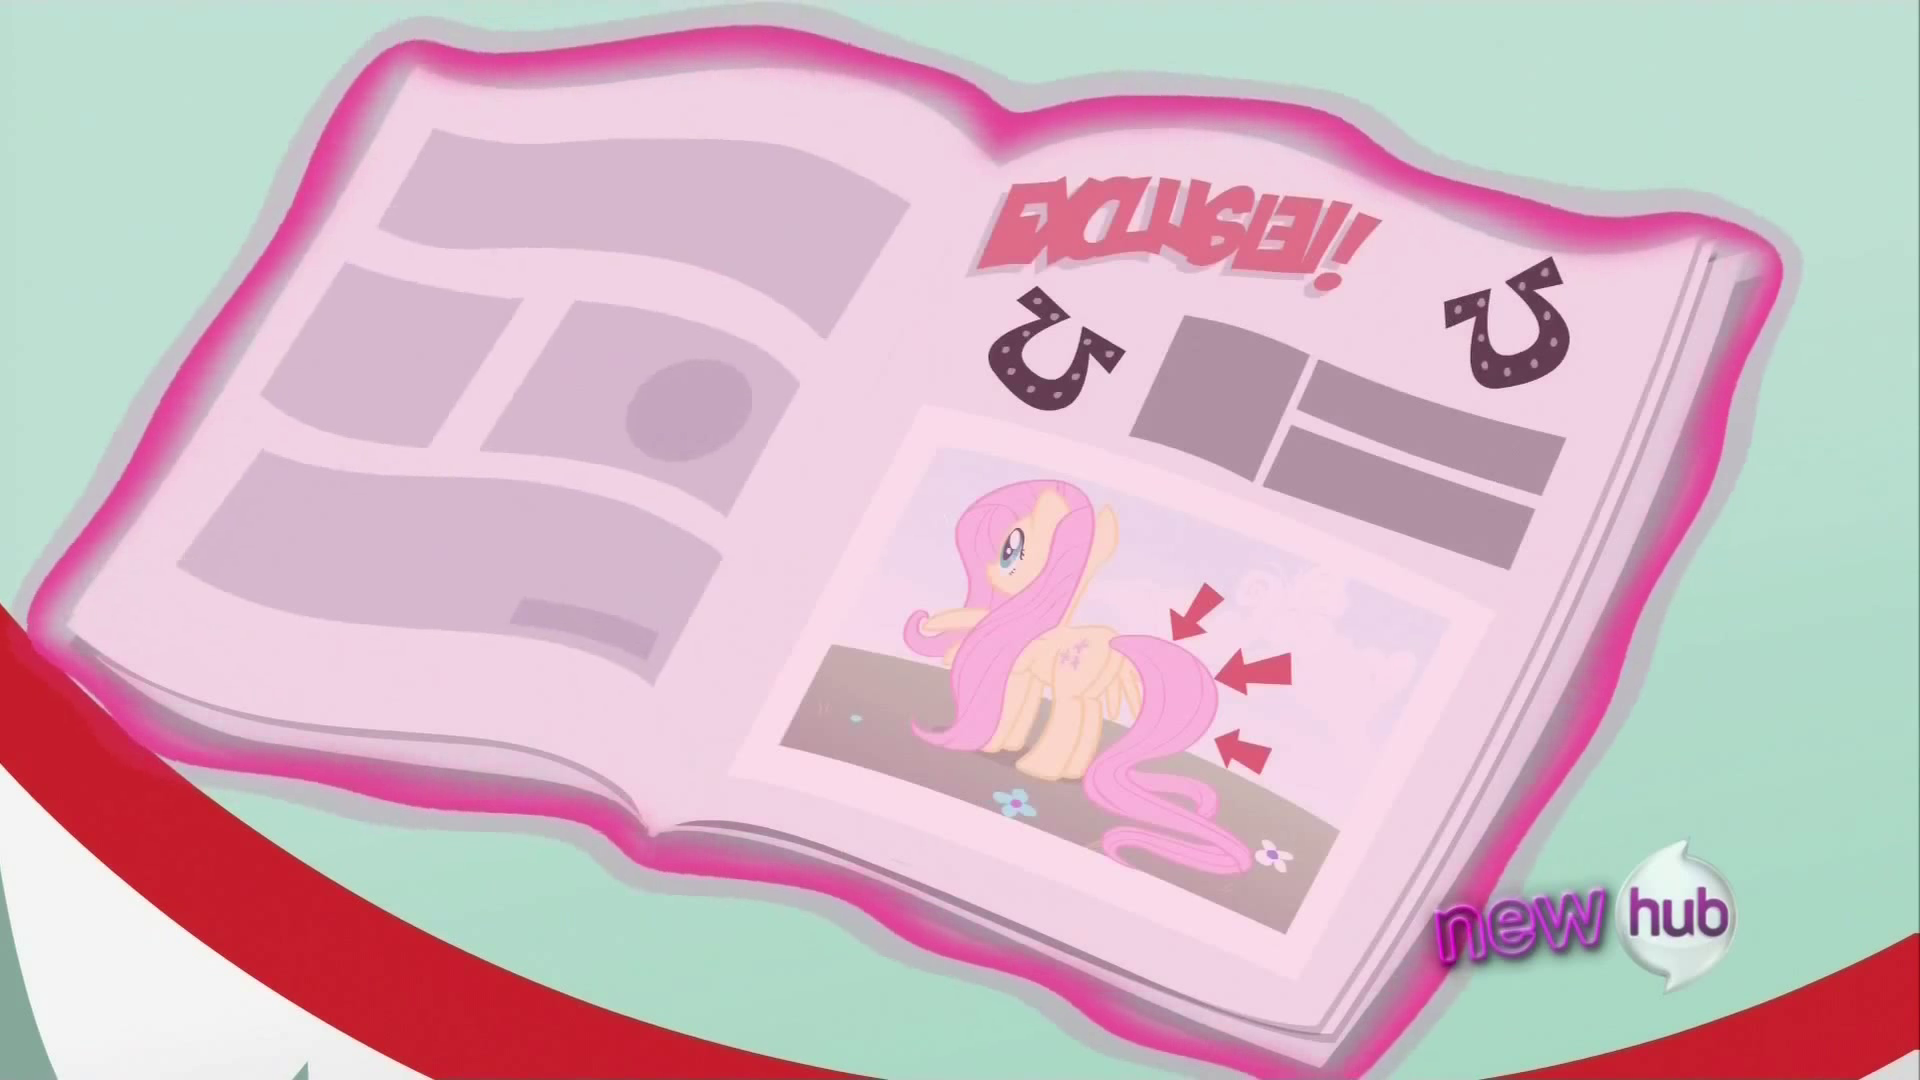 http://img2.wikia.nocookie.net/__cb20120401063938/mlp/images/9/9f/Fluttershy_tail_extensions_S2E23.png